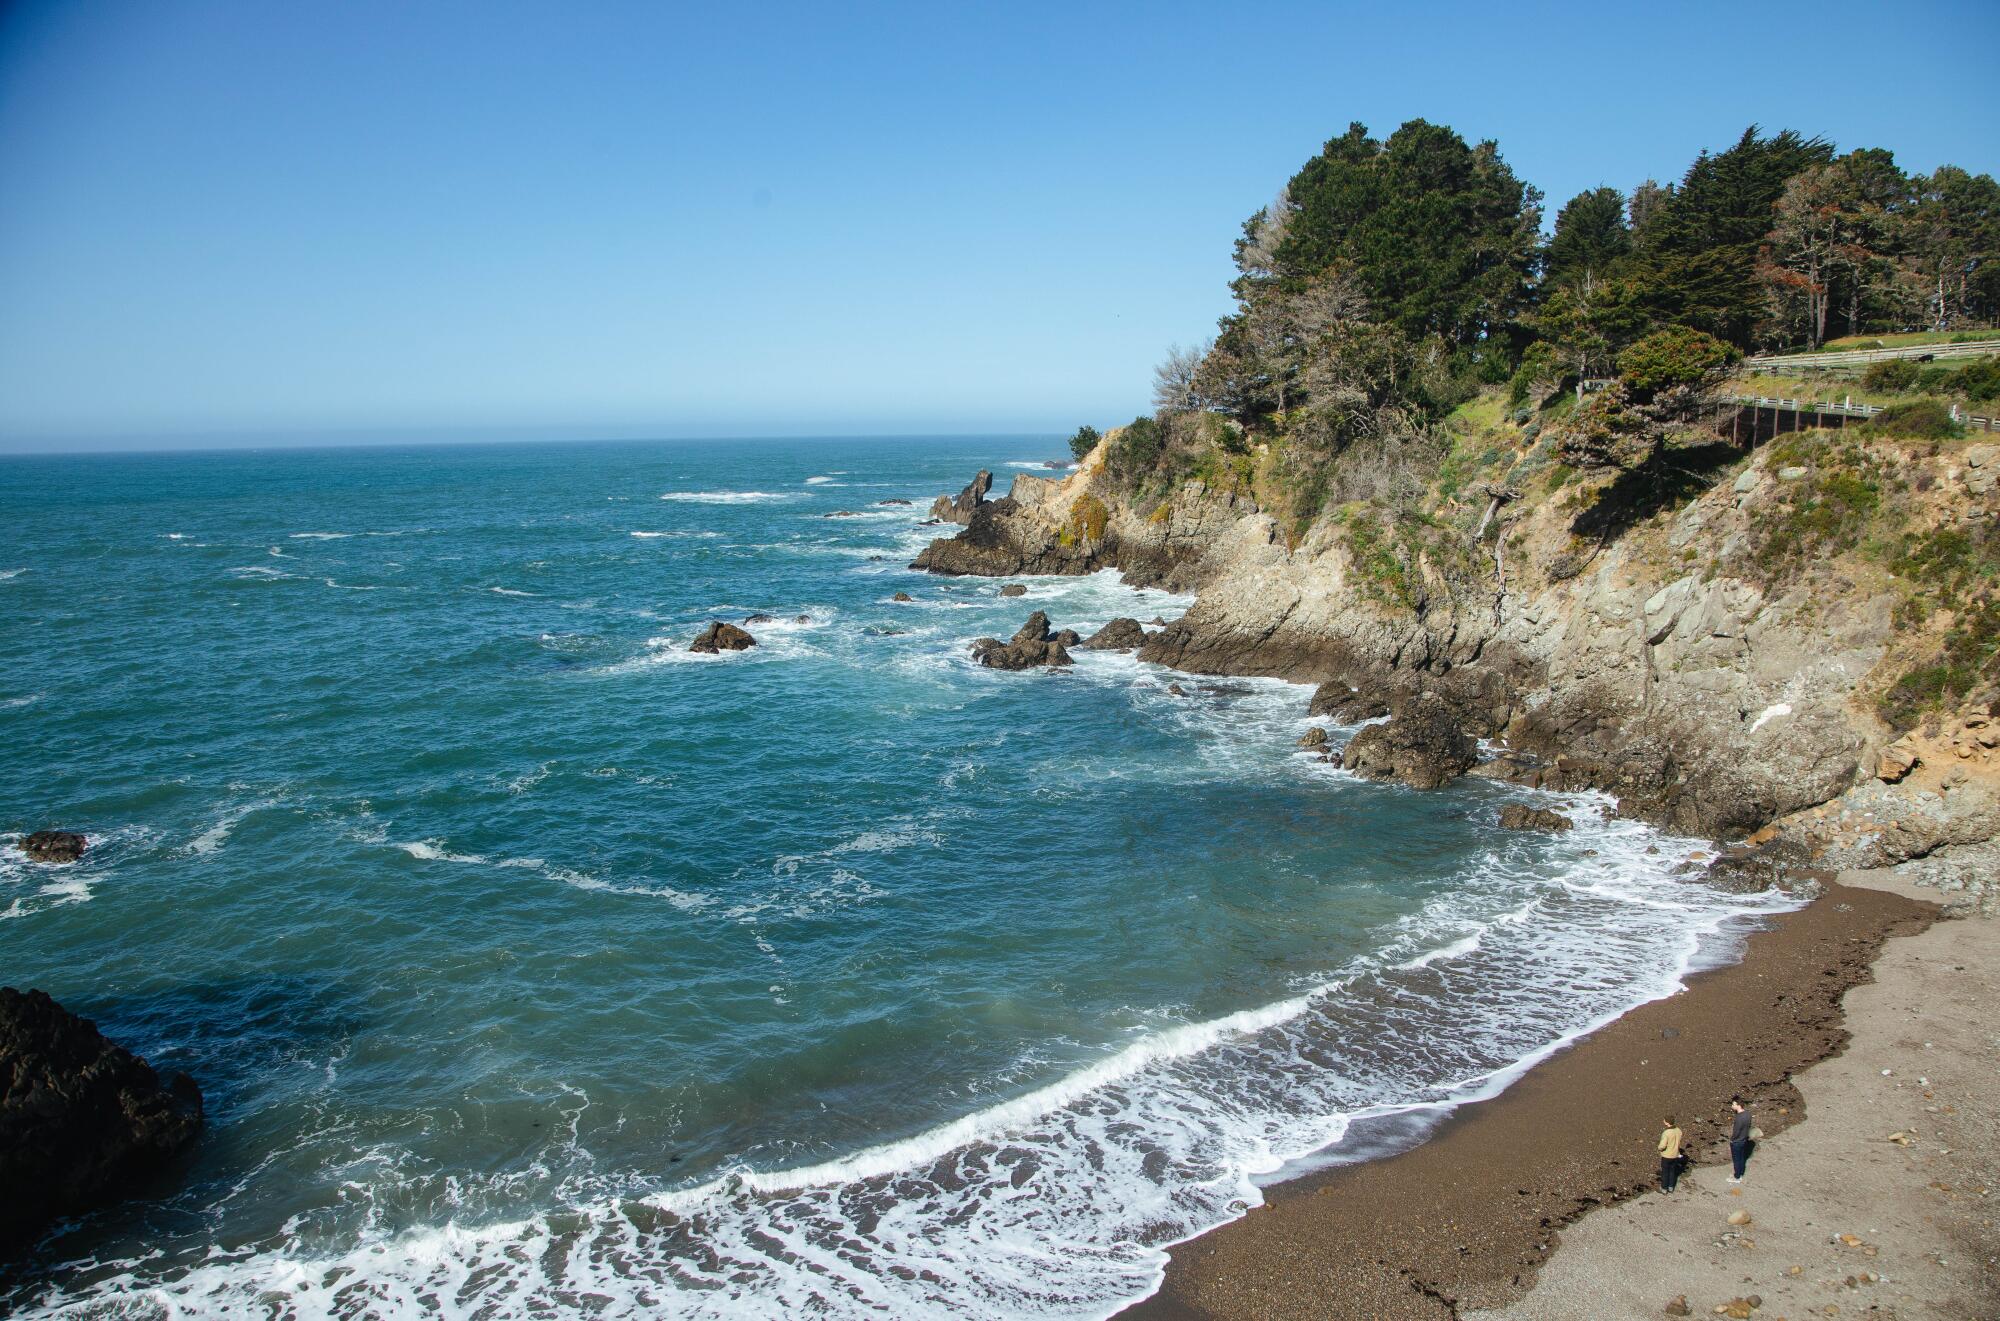 An ocean cove with a sandy beach and trees above.